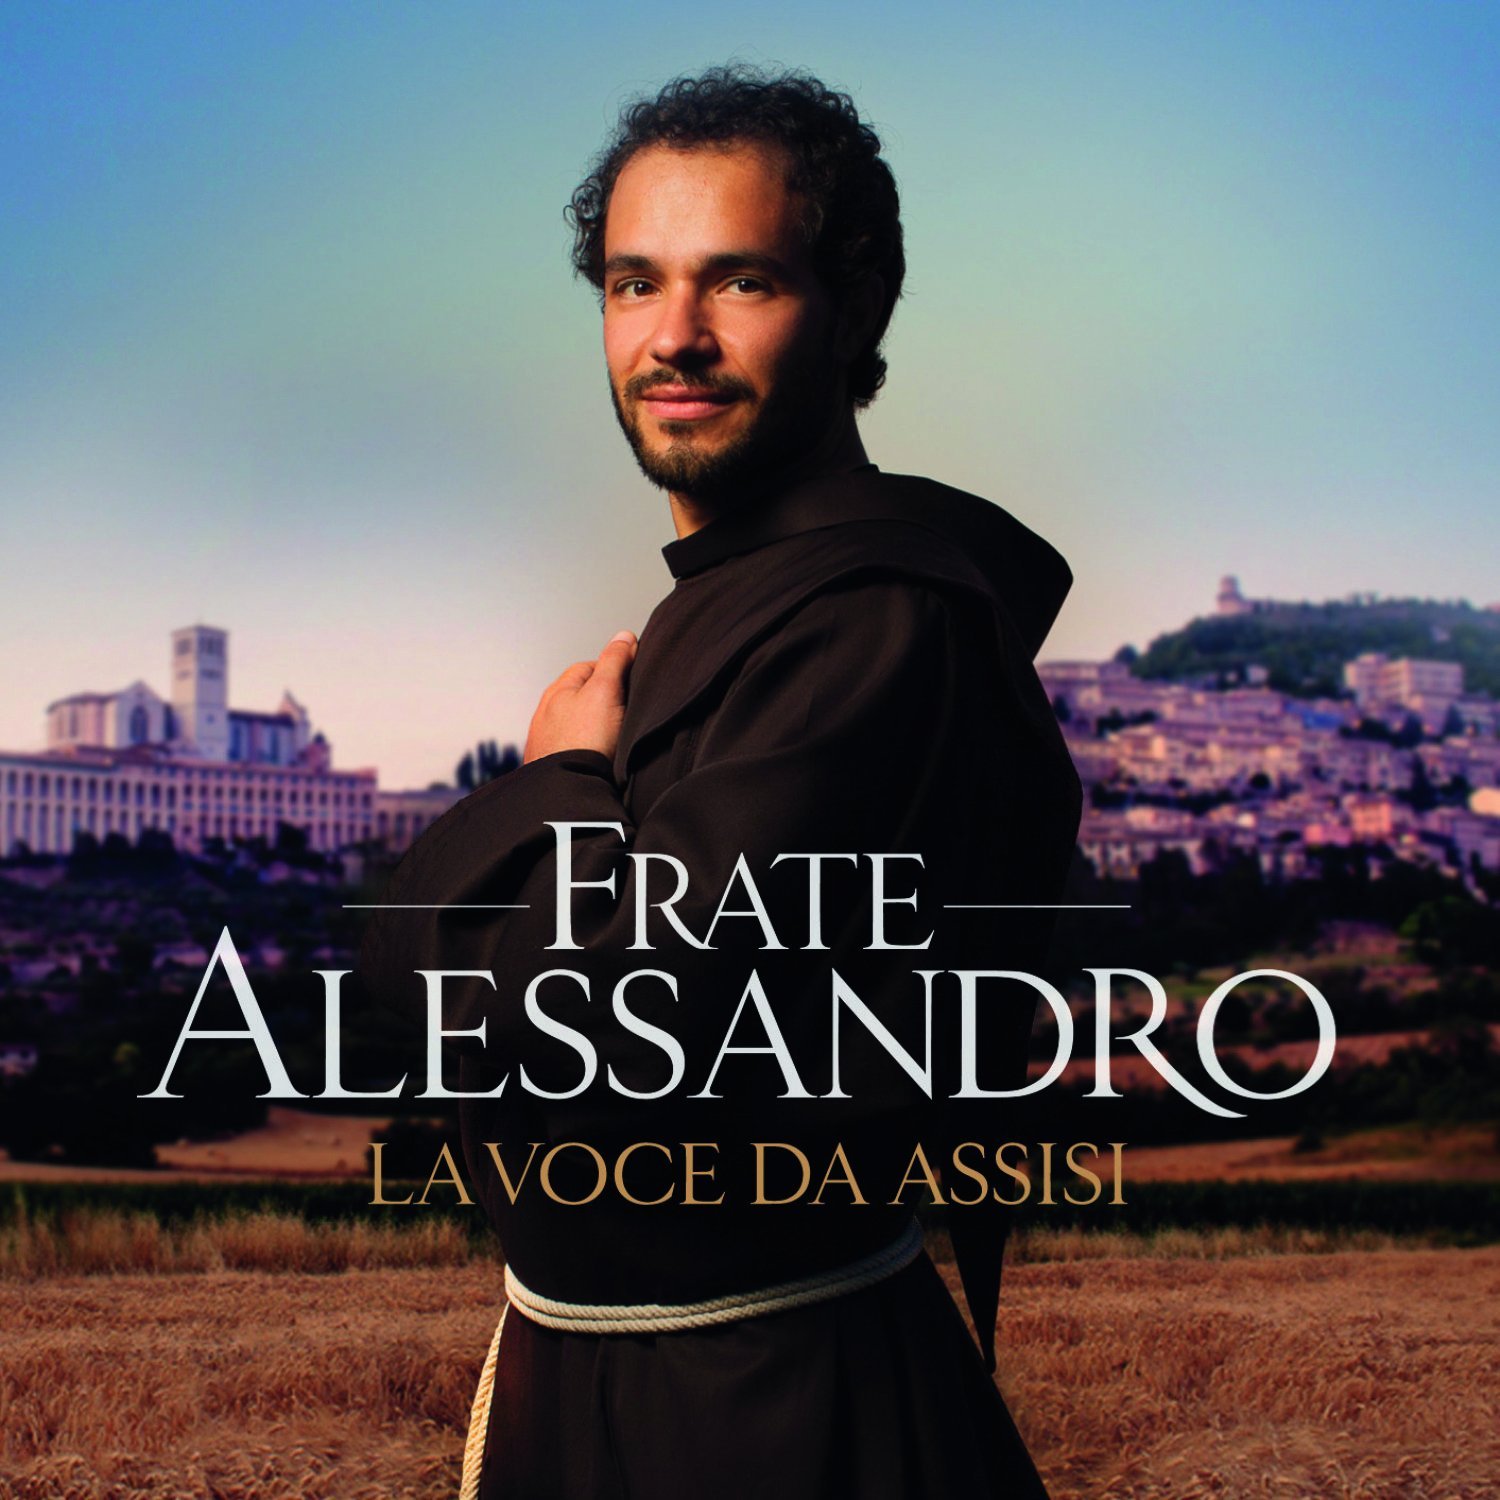 Friar Alessandro – Voice From Assisi (2012) [HDTracks FLAC 24bit/96kHz]